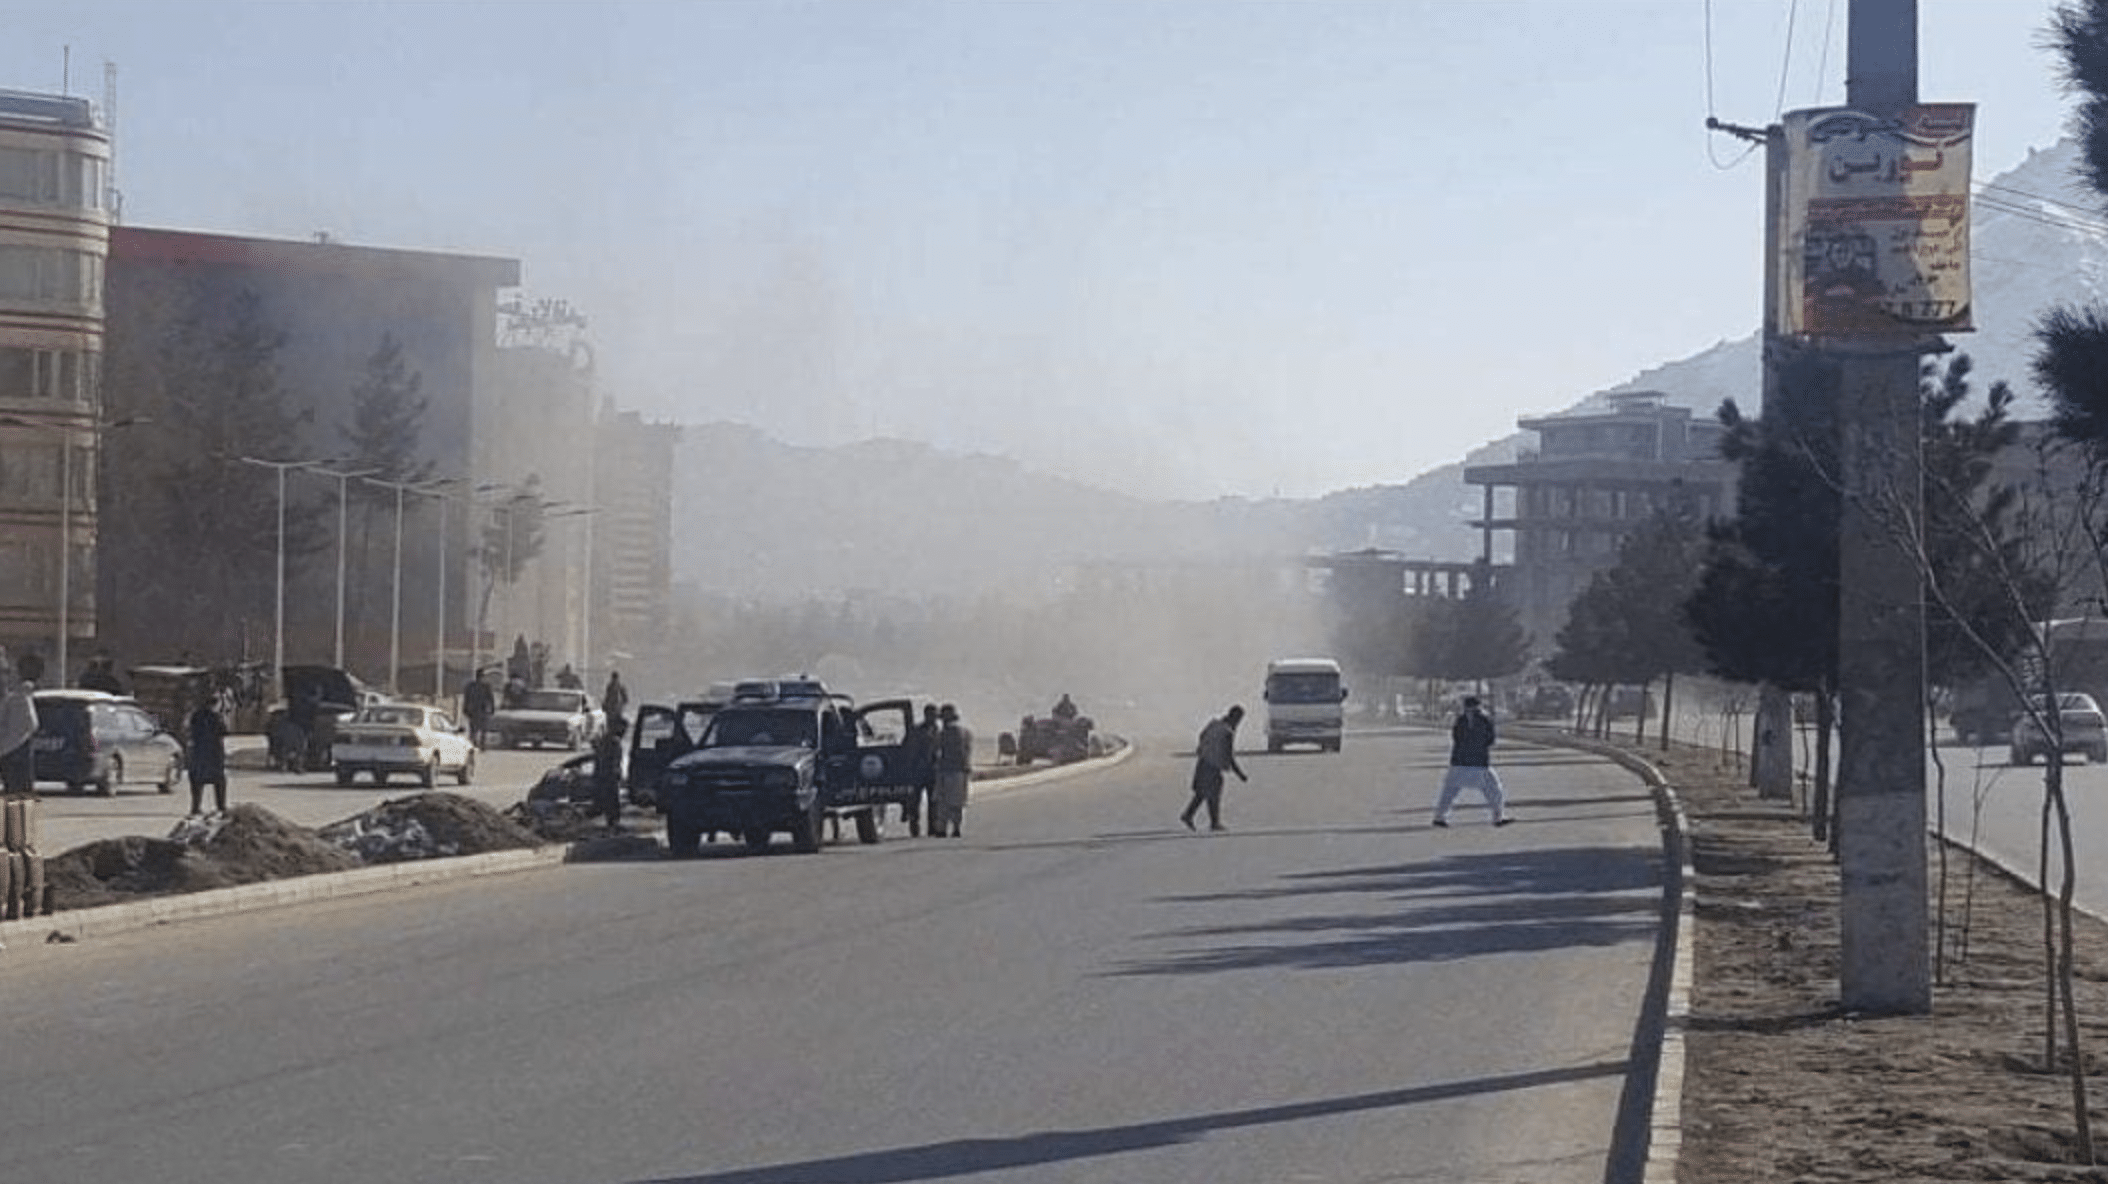 Twin Bombings in PD-10 Kabul and PD-5 Target Taliban (IEA) Vehicles; Islamic State Khurasan (ISK) Claims One in Kabul, Afghanistan - 09 April 2022